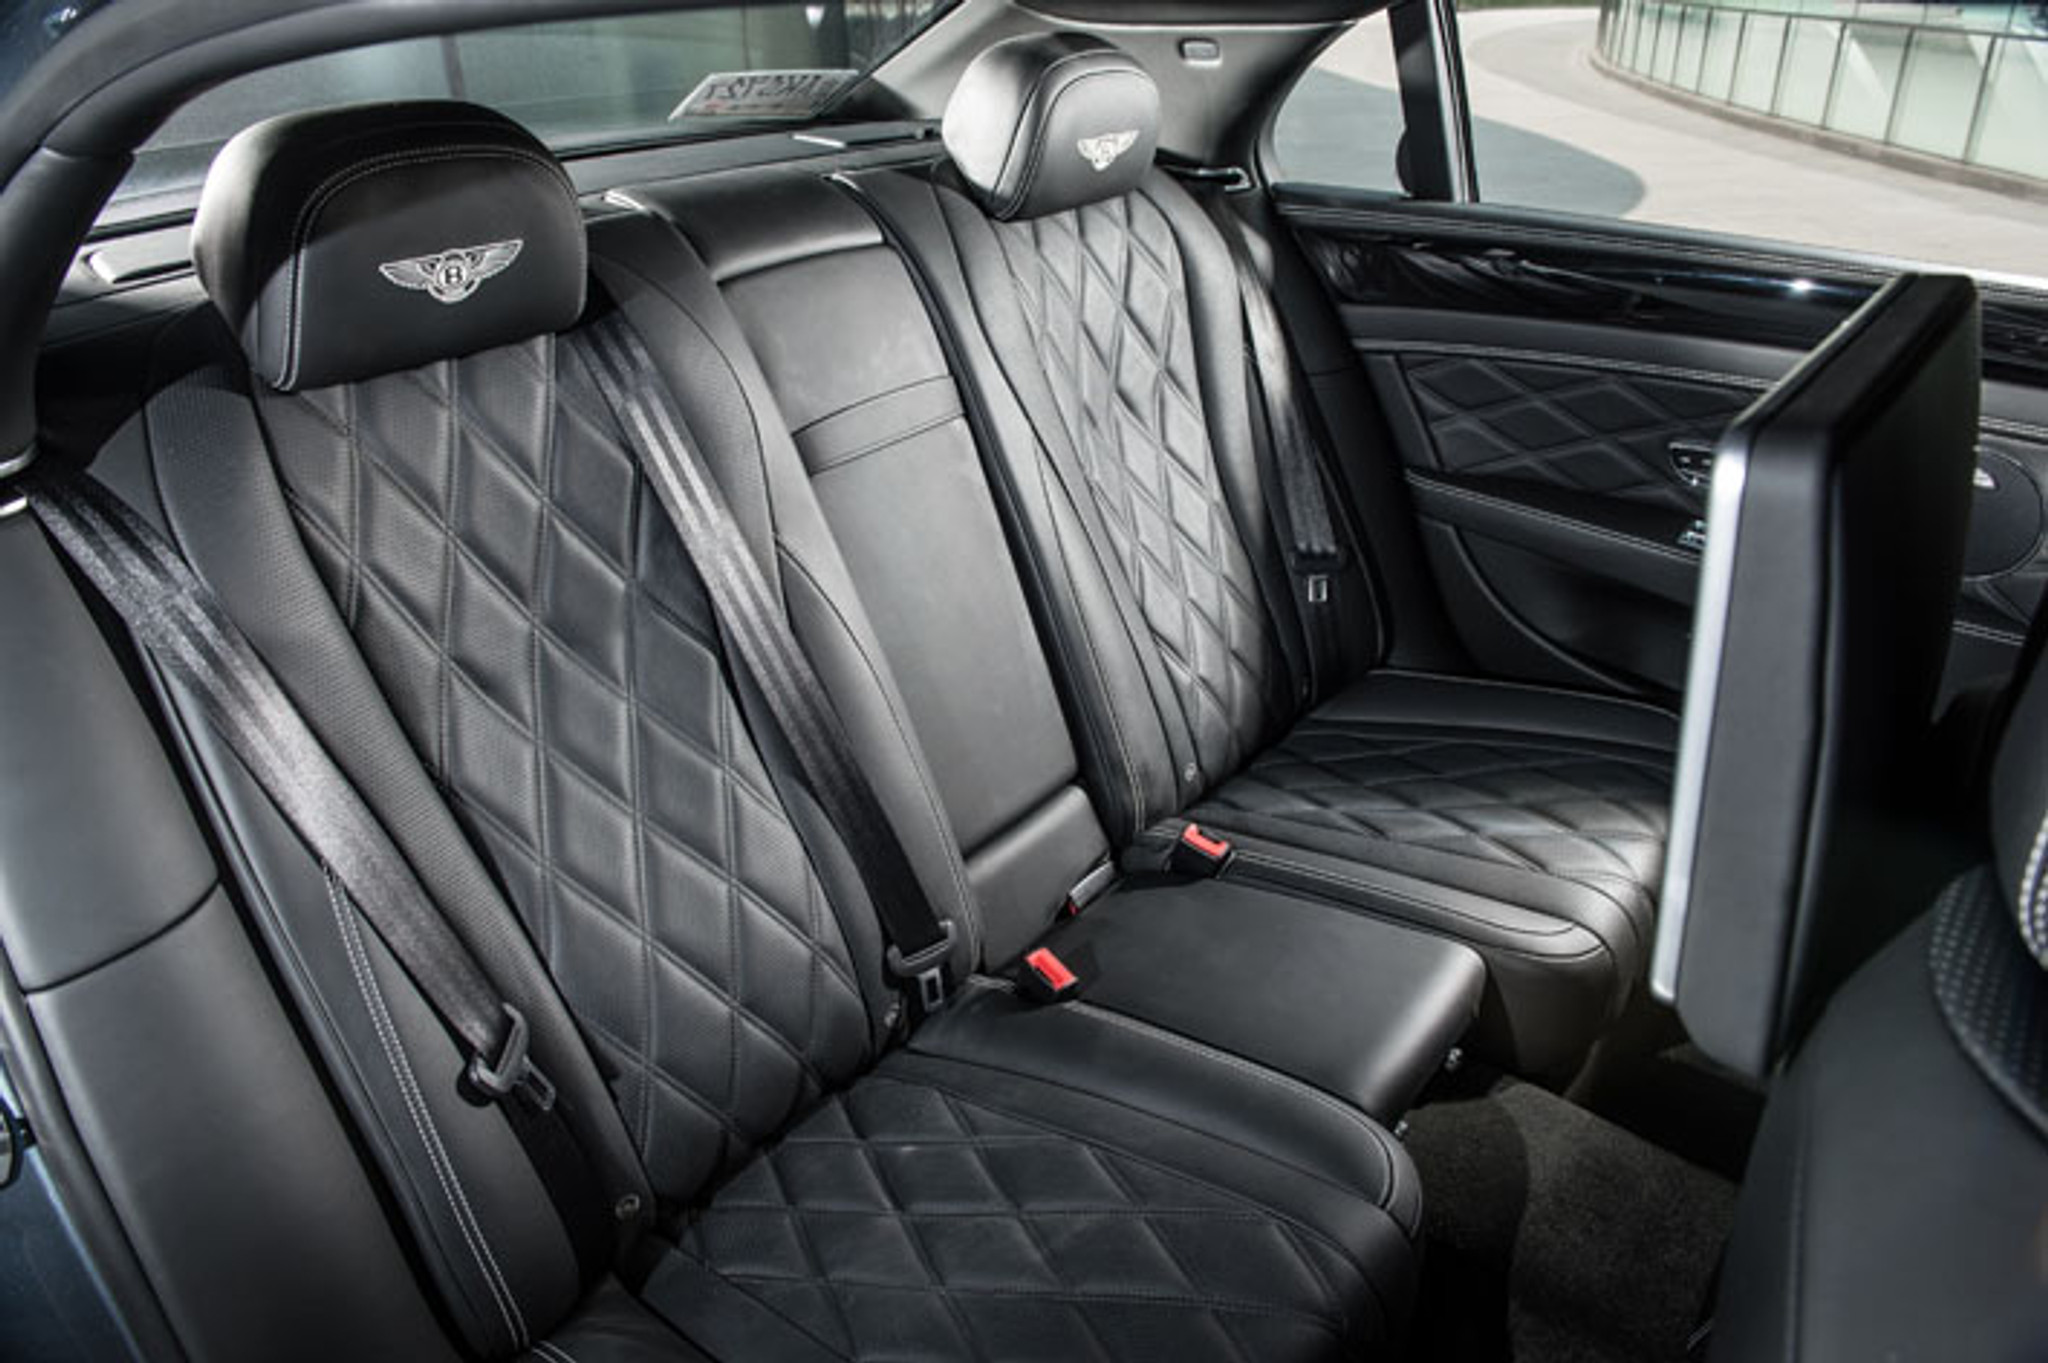 Bentley Gt Quilted Interior Leather Programme